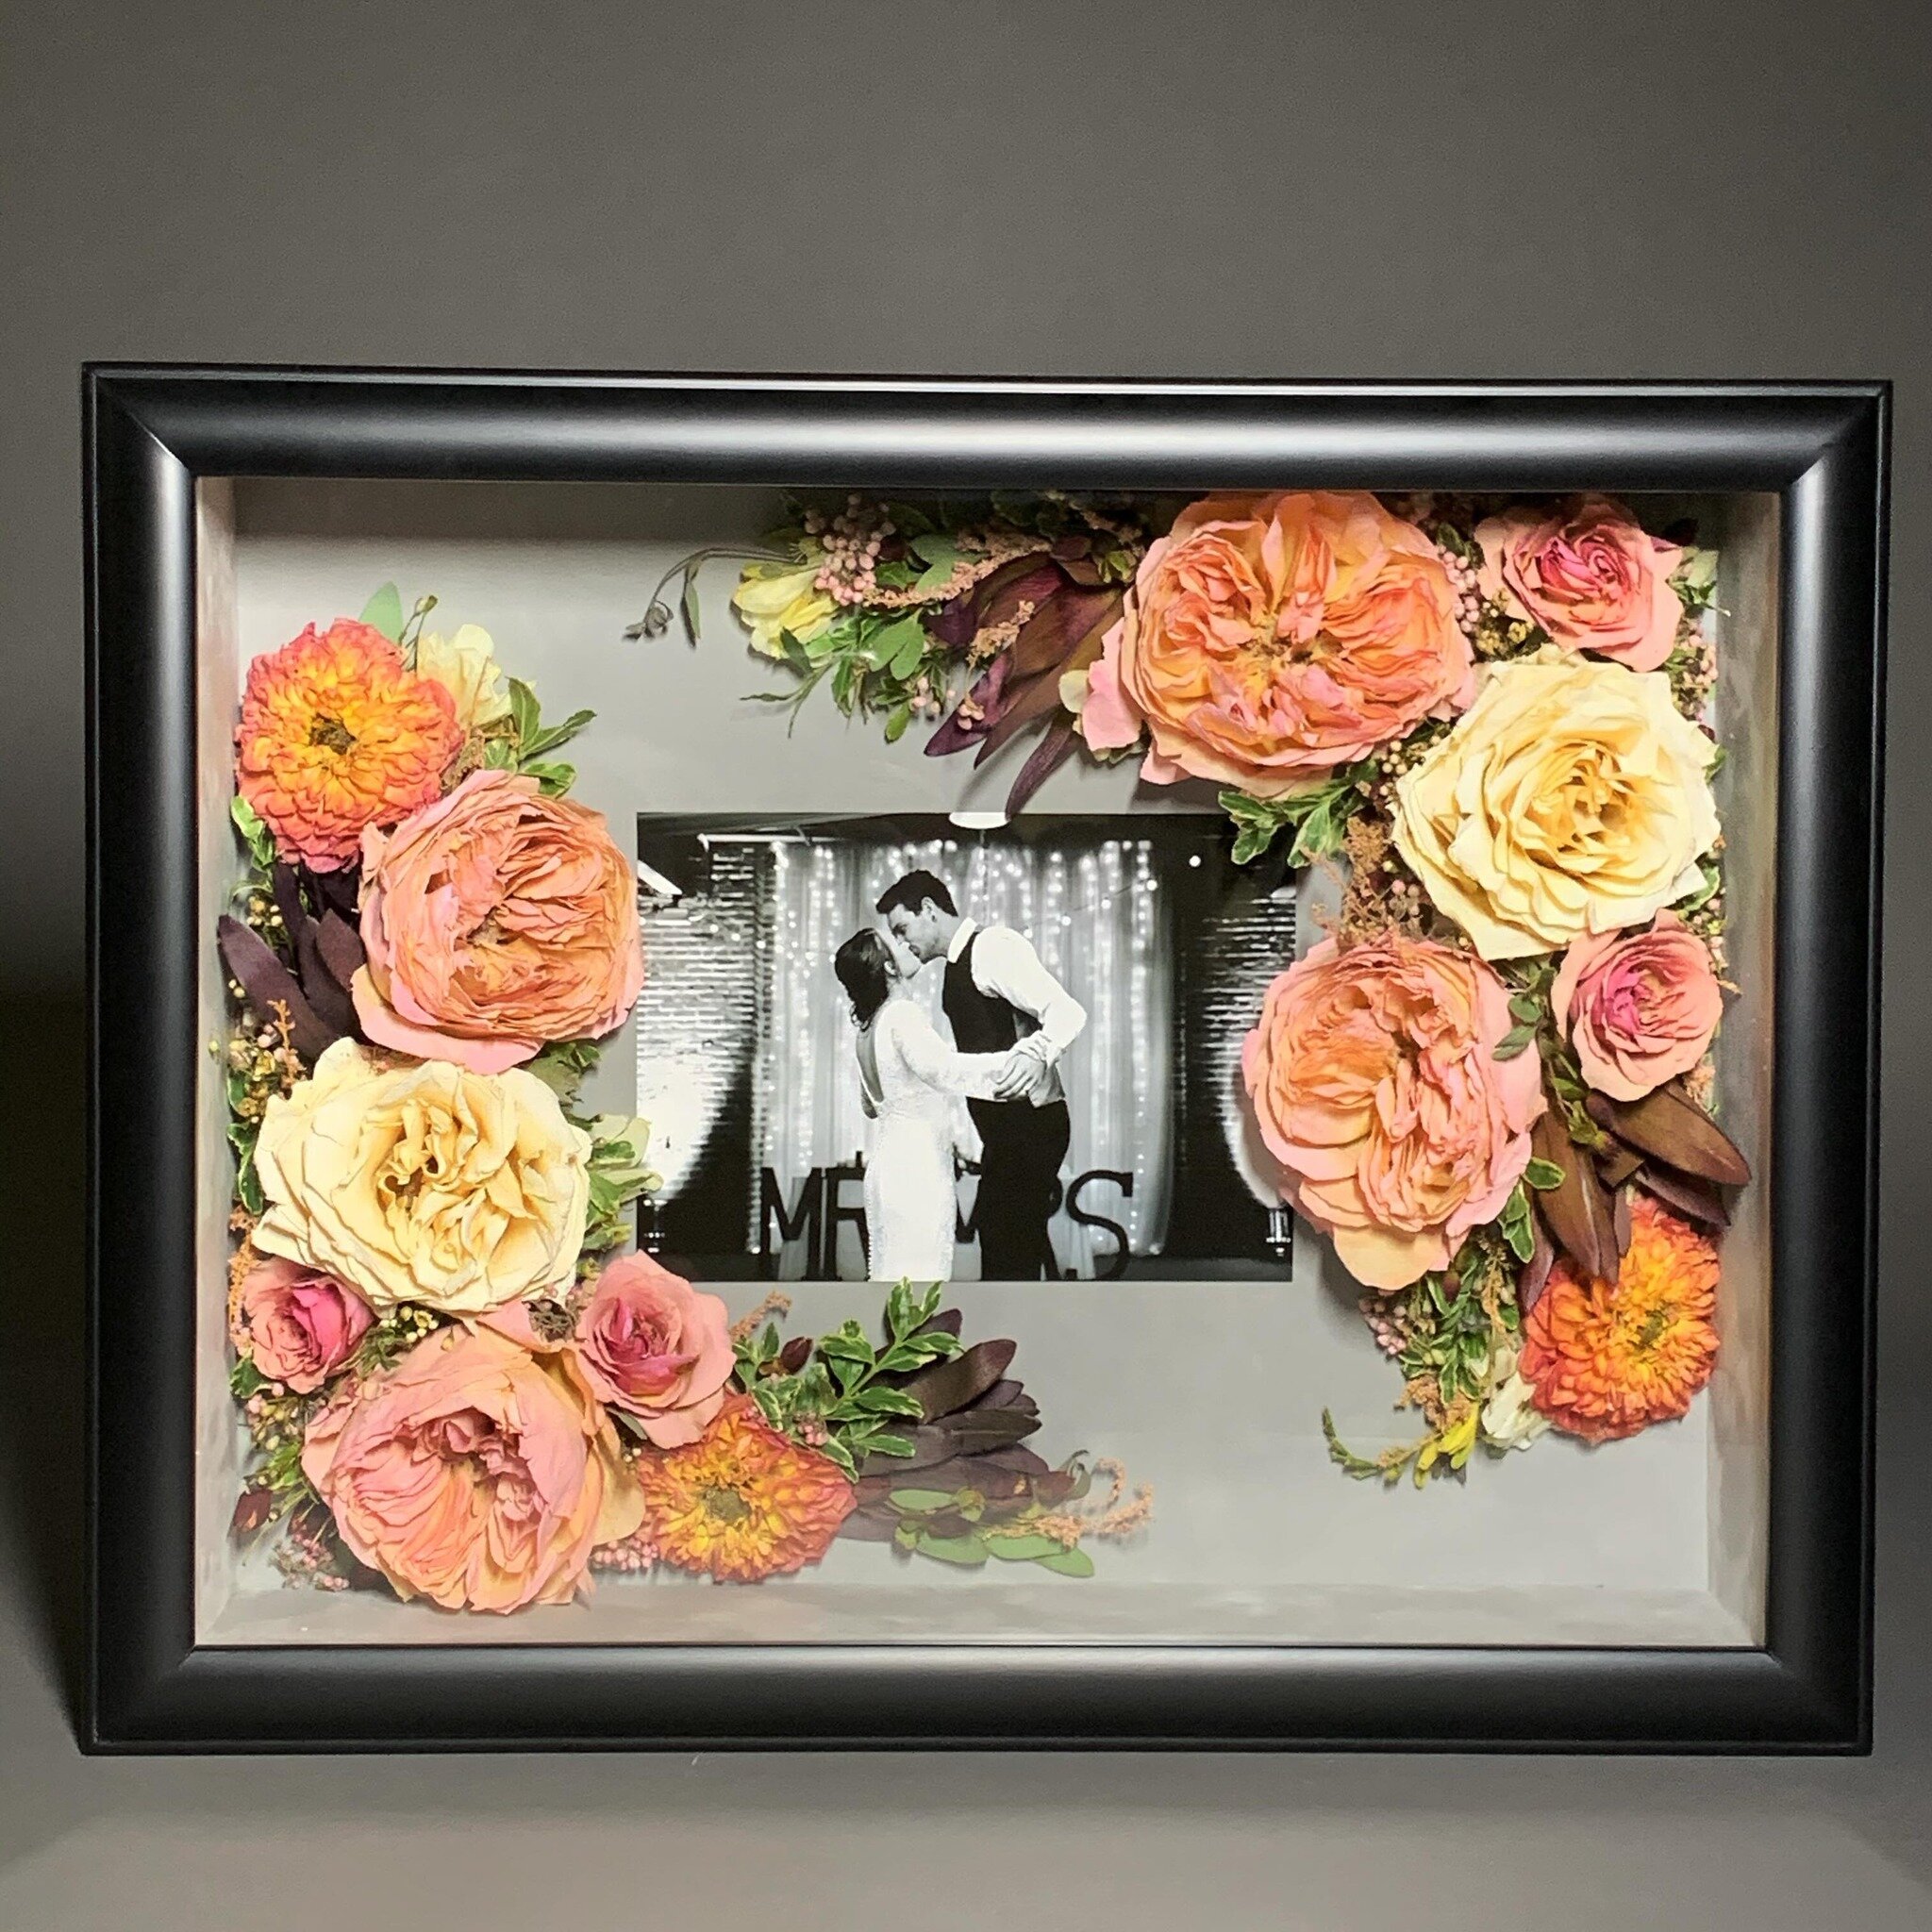 These vibrant bright flowers accenting the newlyweds fairy tale photo are beautifully coupled for an overall display 🌺